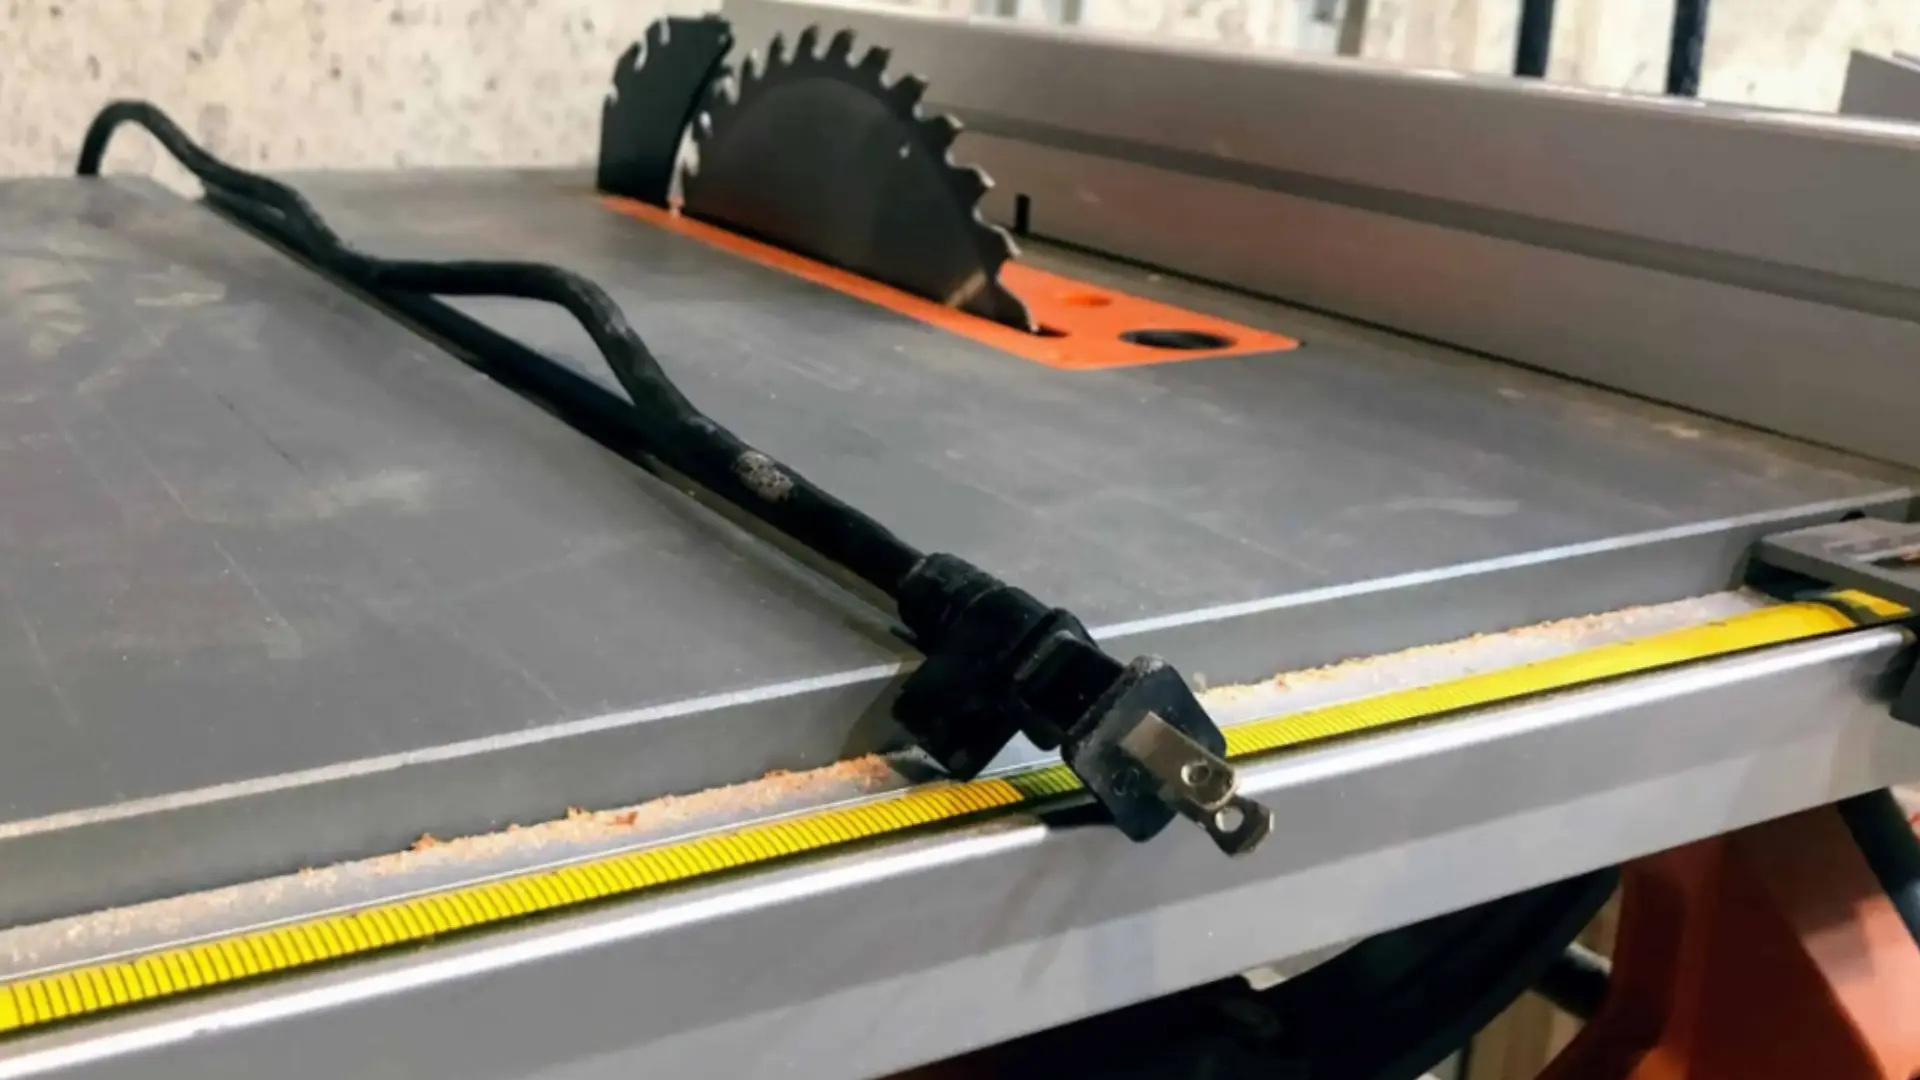 Watts, Amps and Volts for table saw